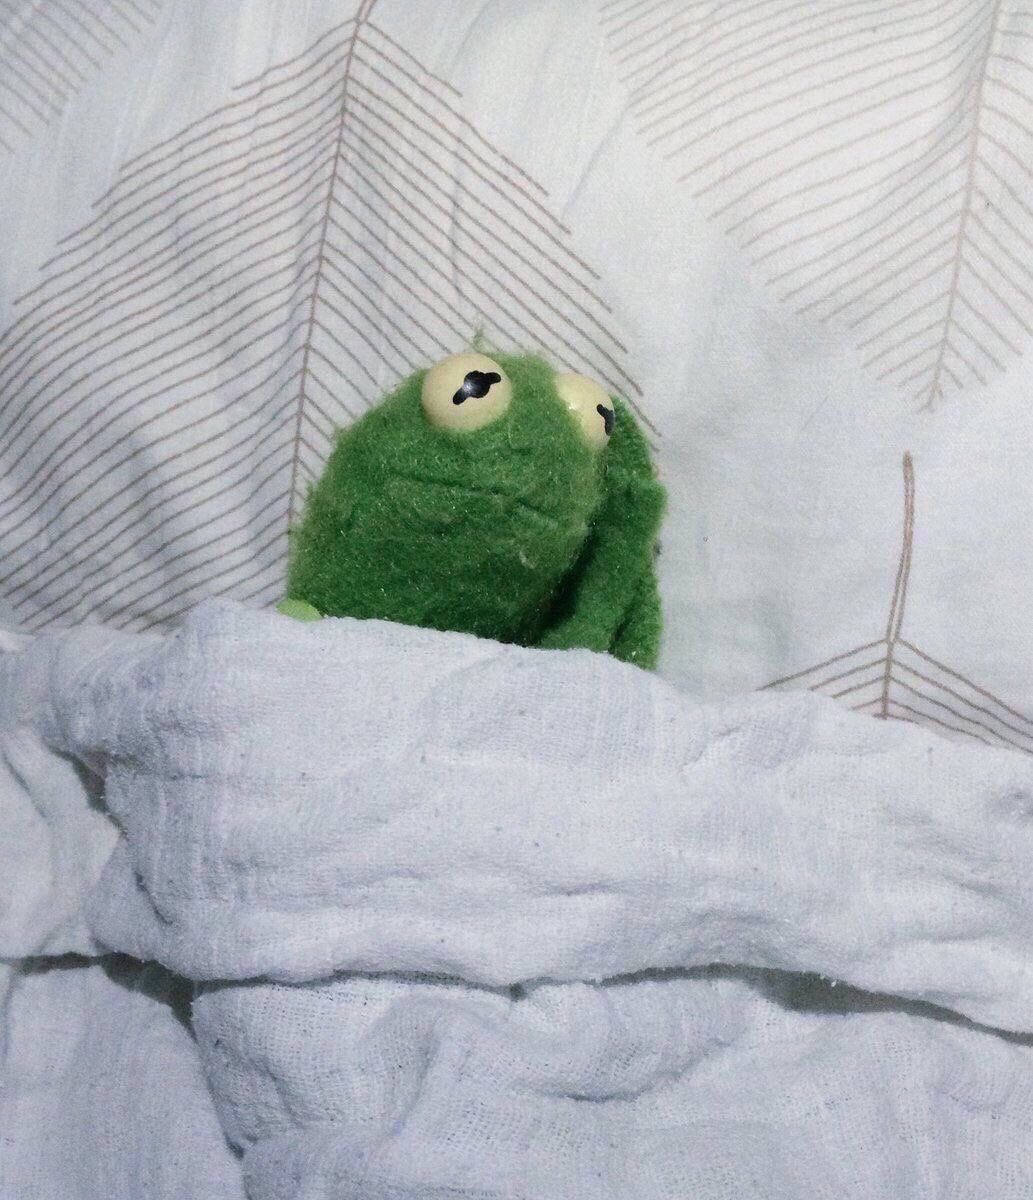 No "sad kermit bed" memes have been featured yet. 